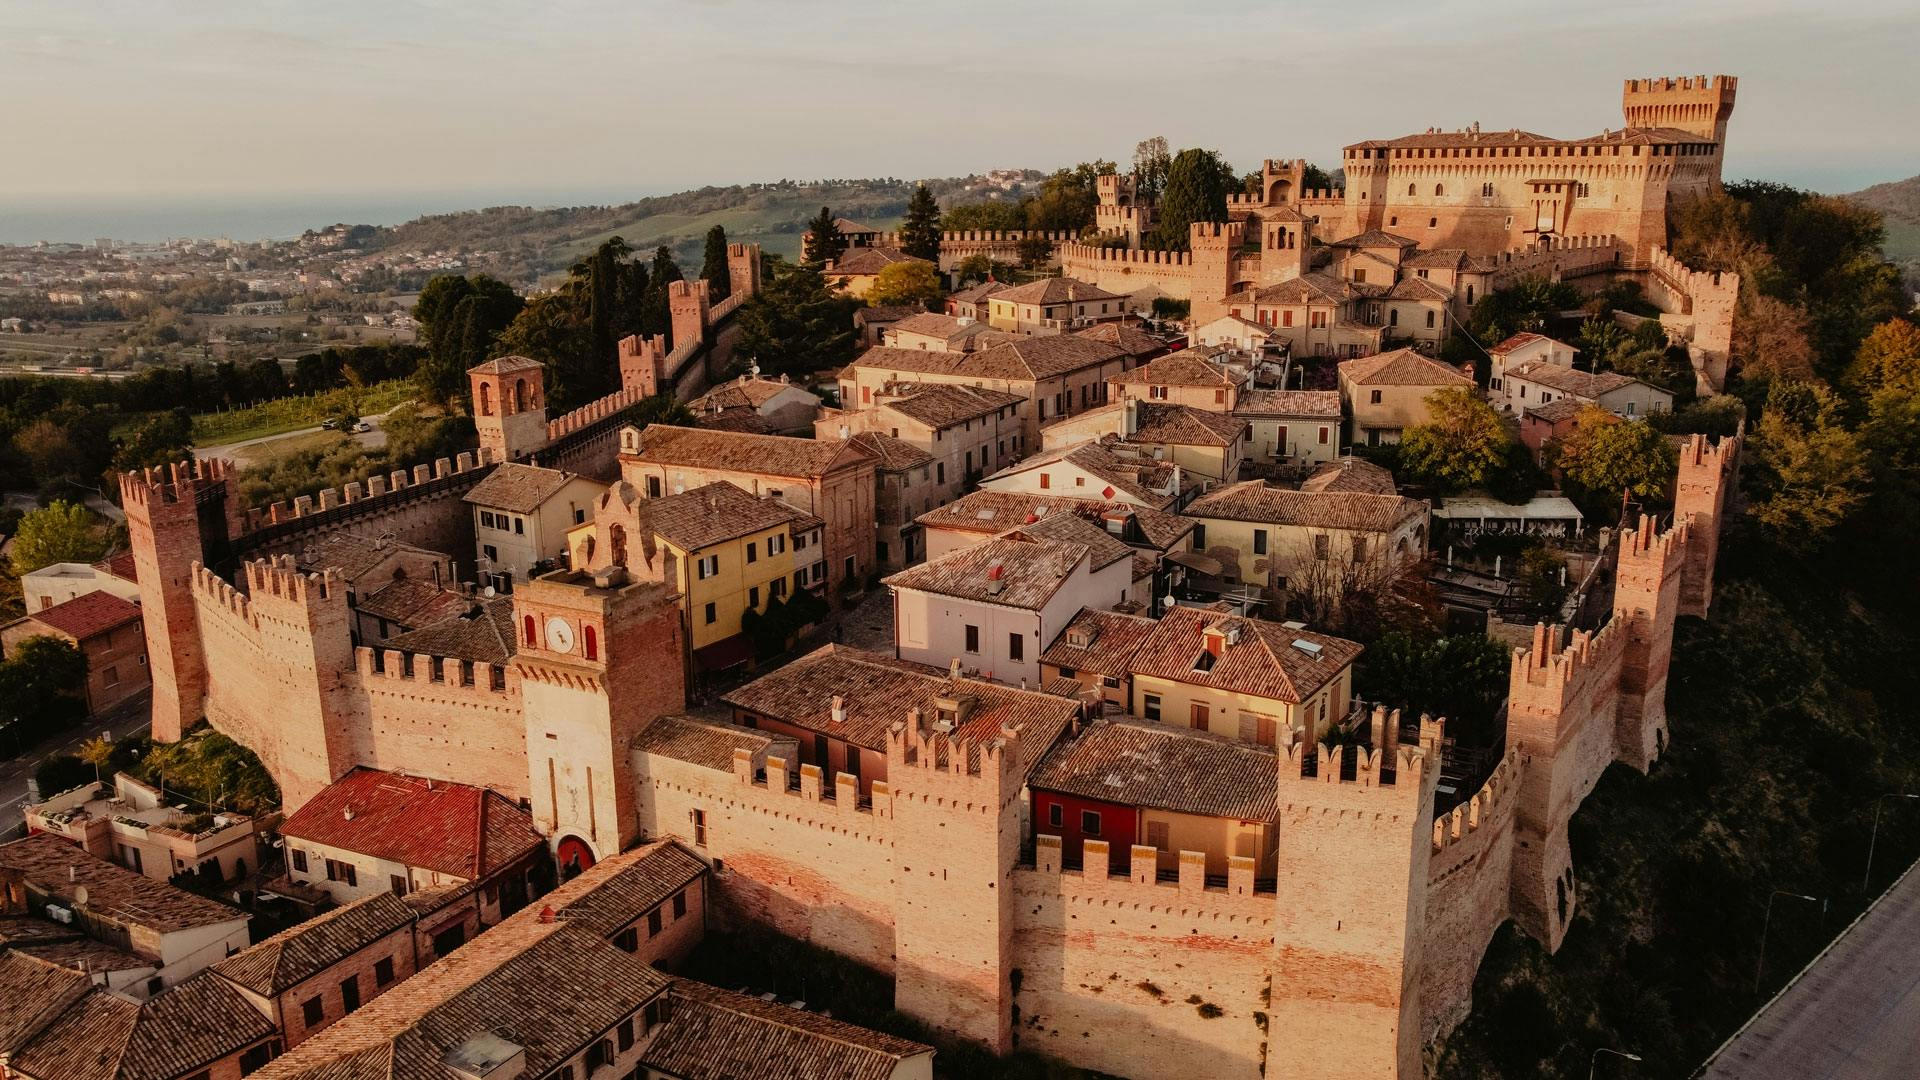 Gradara complete guided small-group tour